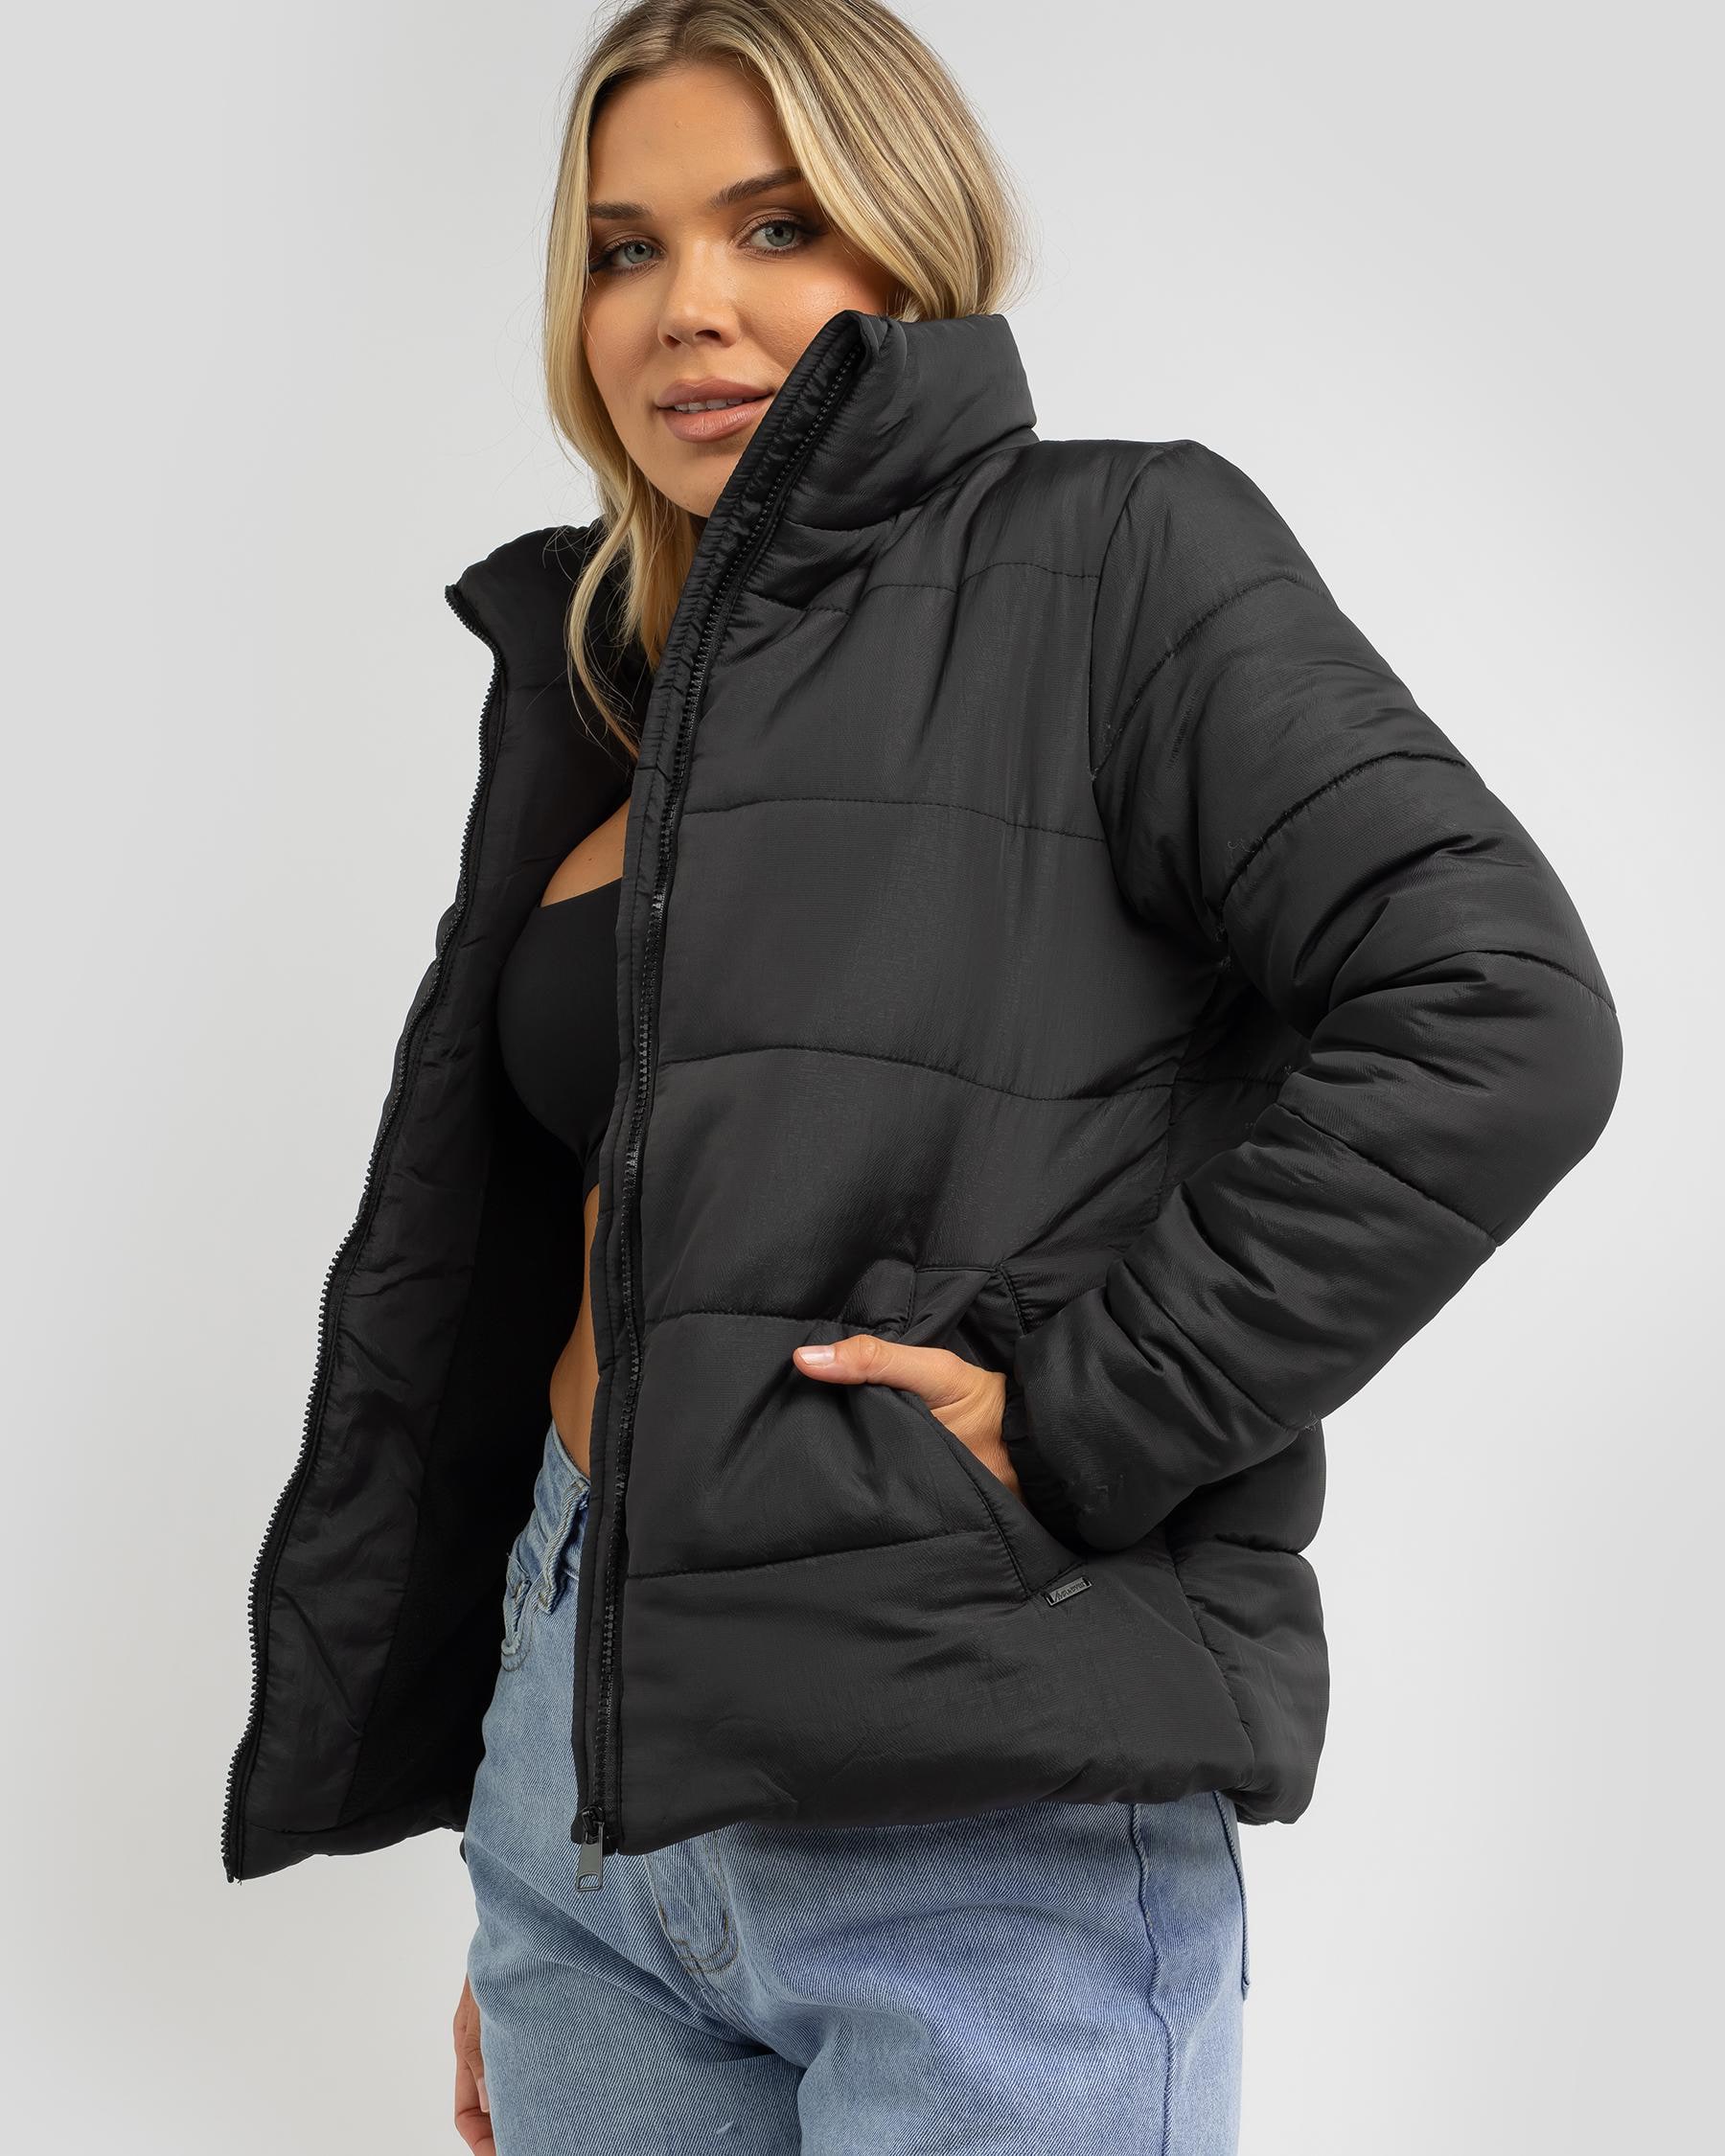 Ava And Ever Jezebel Puffer Jacket In Black - Fast Shipping & Easy ...